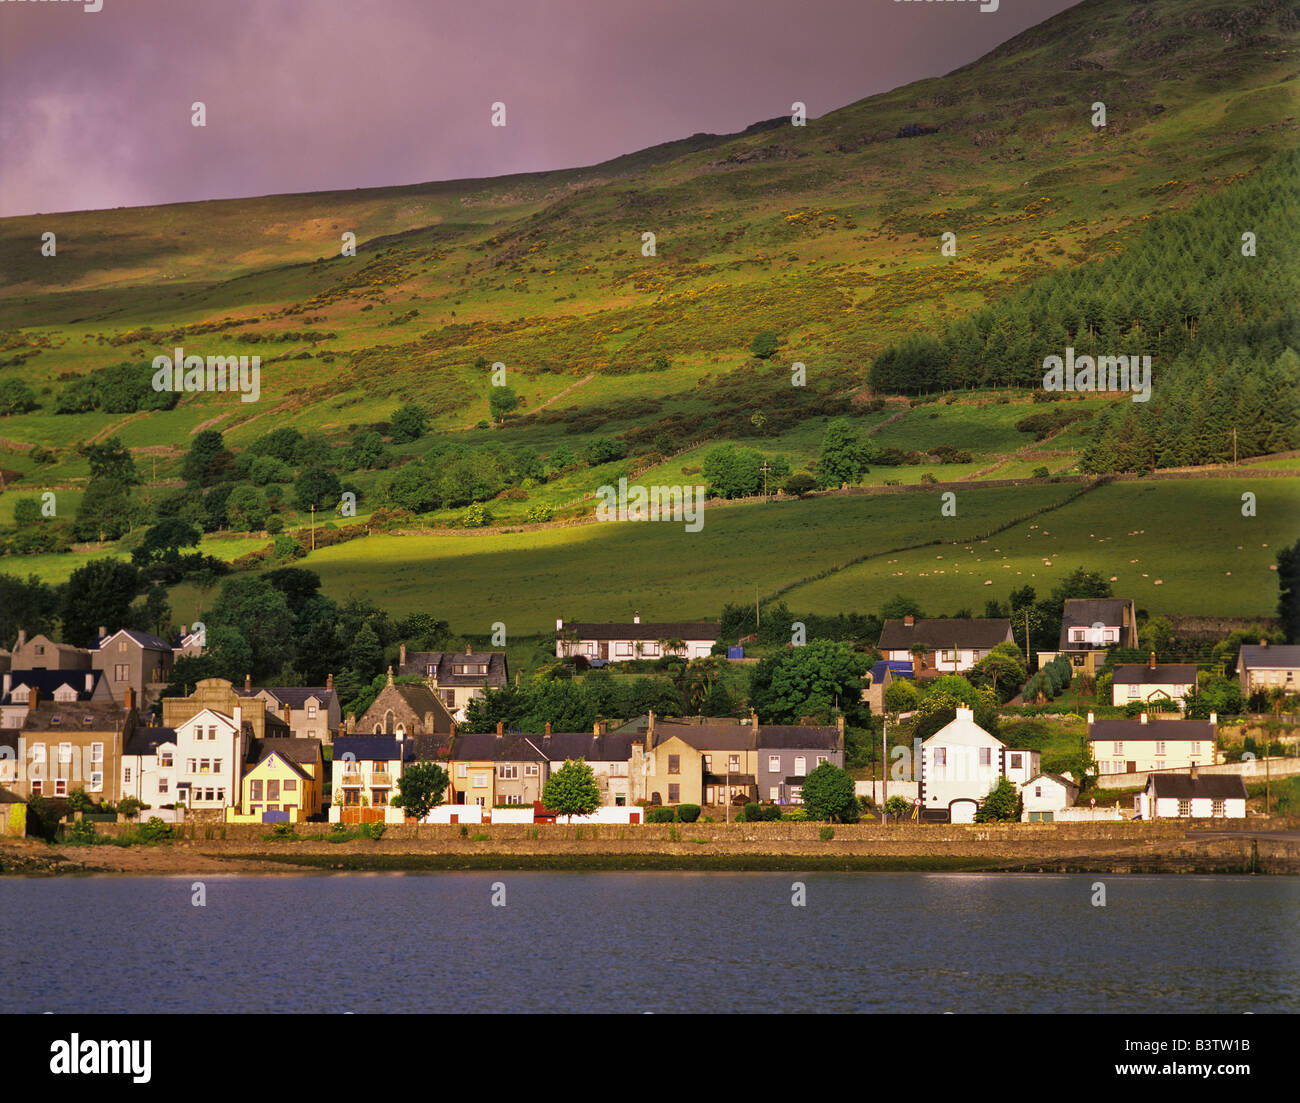 Europe, Ireland, County Louth. The town of Carlingford on the mountainous Cooley Peninsula. Stock Photo